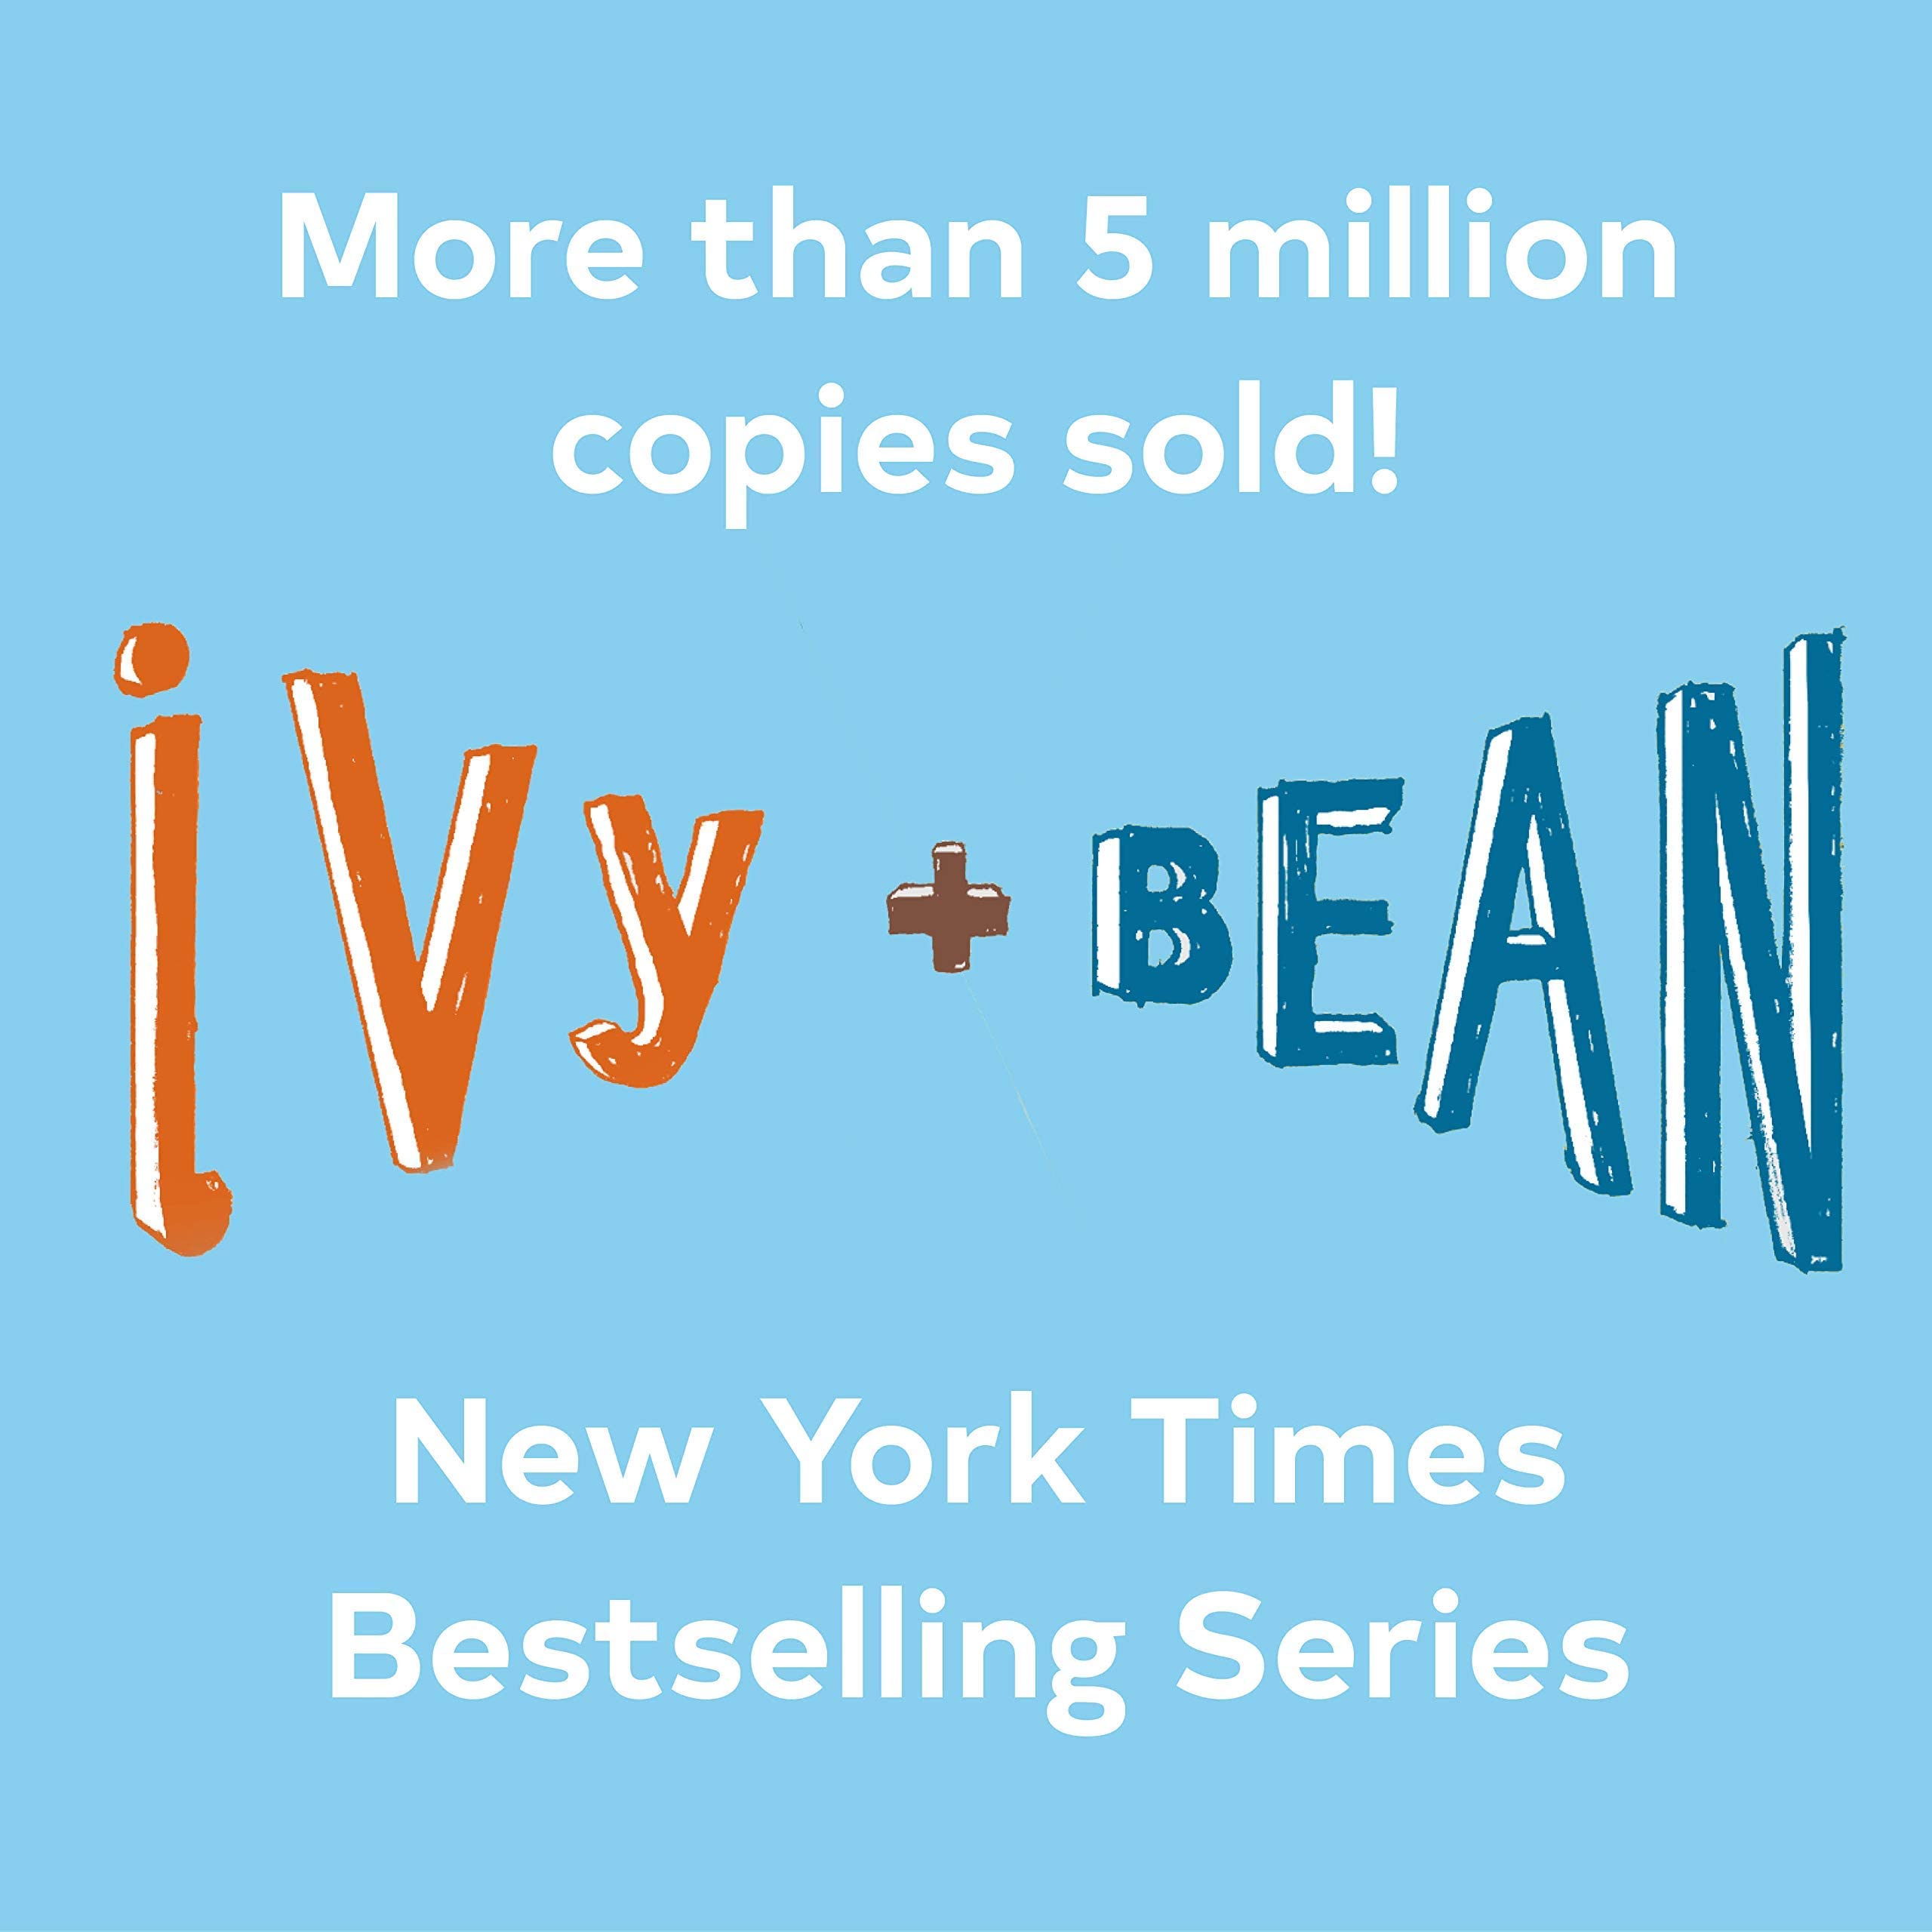 Ivy and Bean Boxed Set 2: (Children's Book Collection, Boxed Set of Books for Kids, Box Set of Children's Books) (Books 4-6)